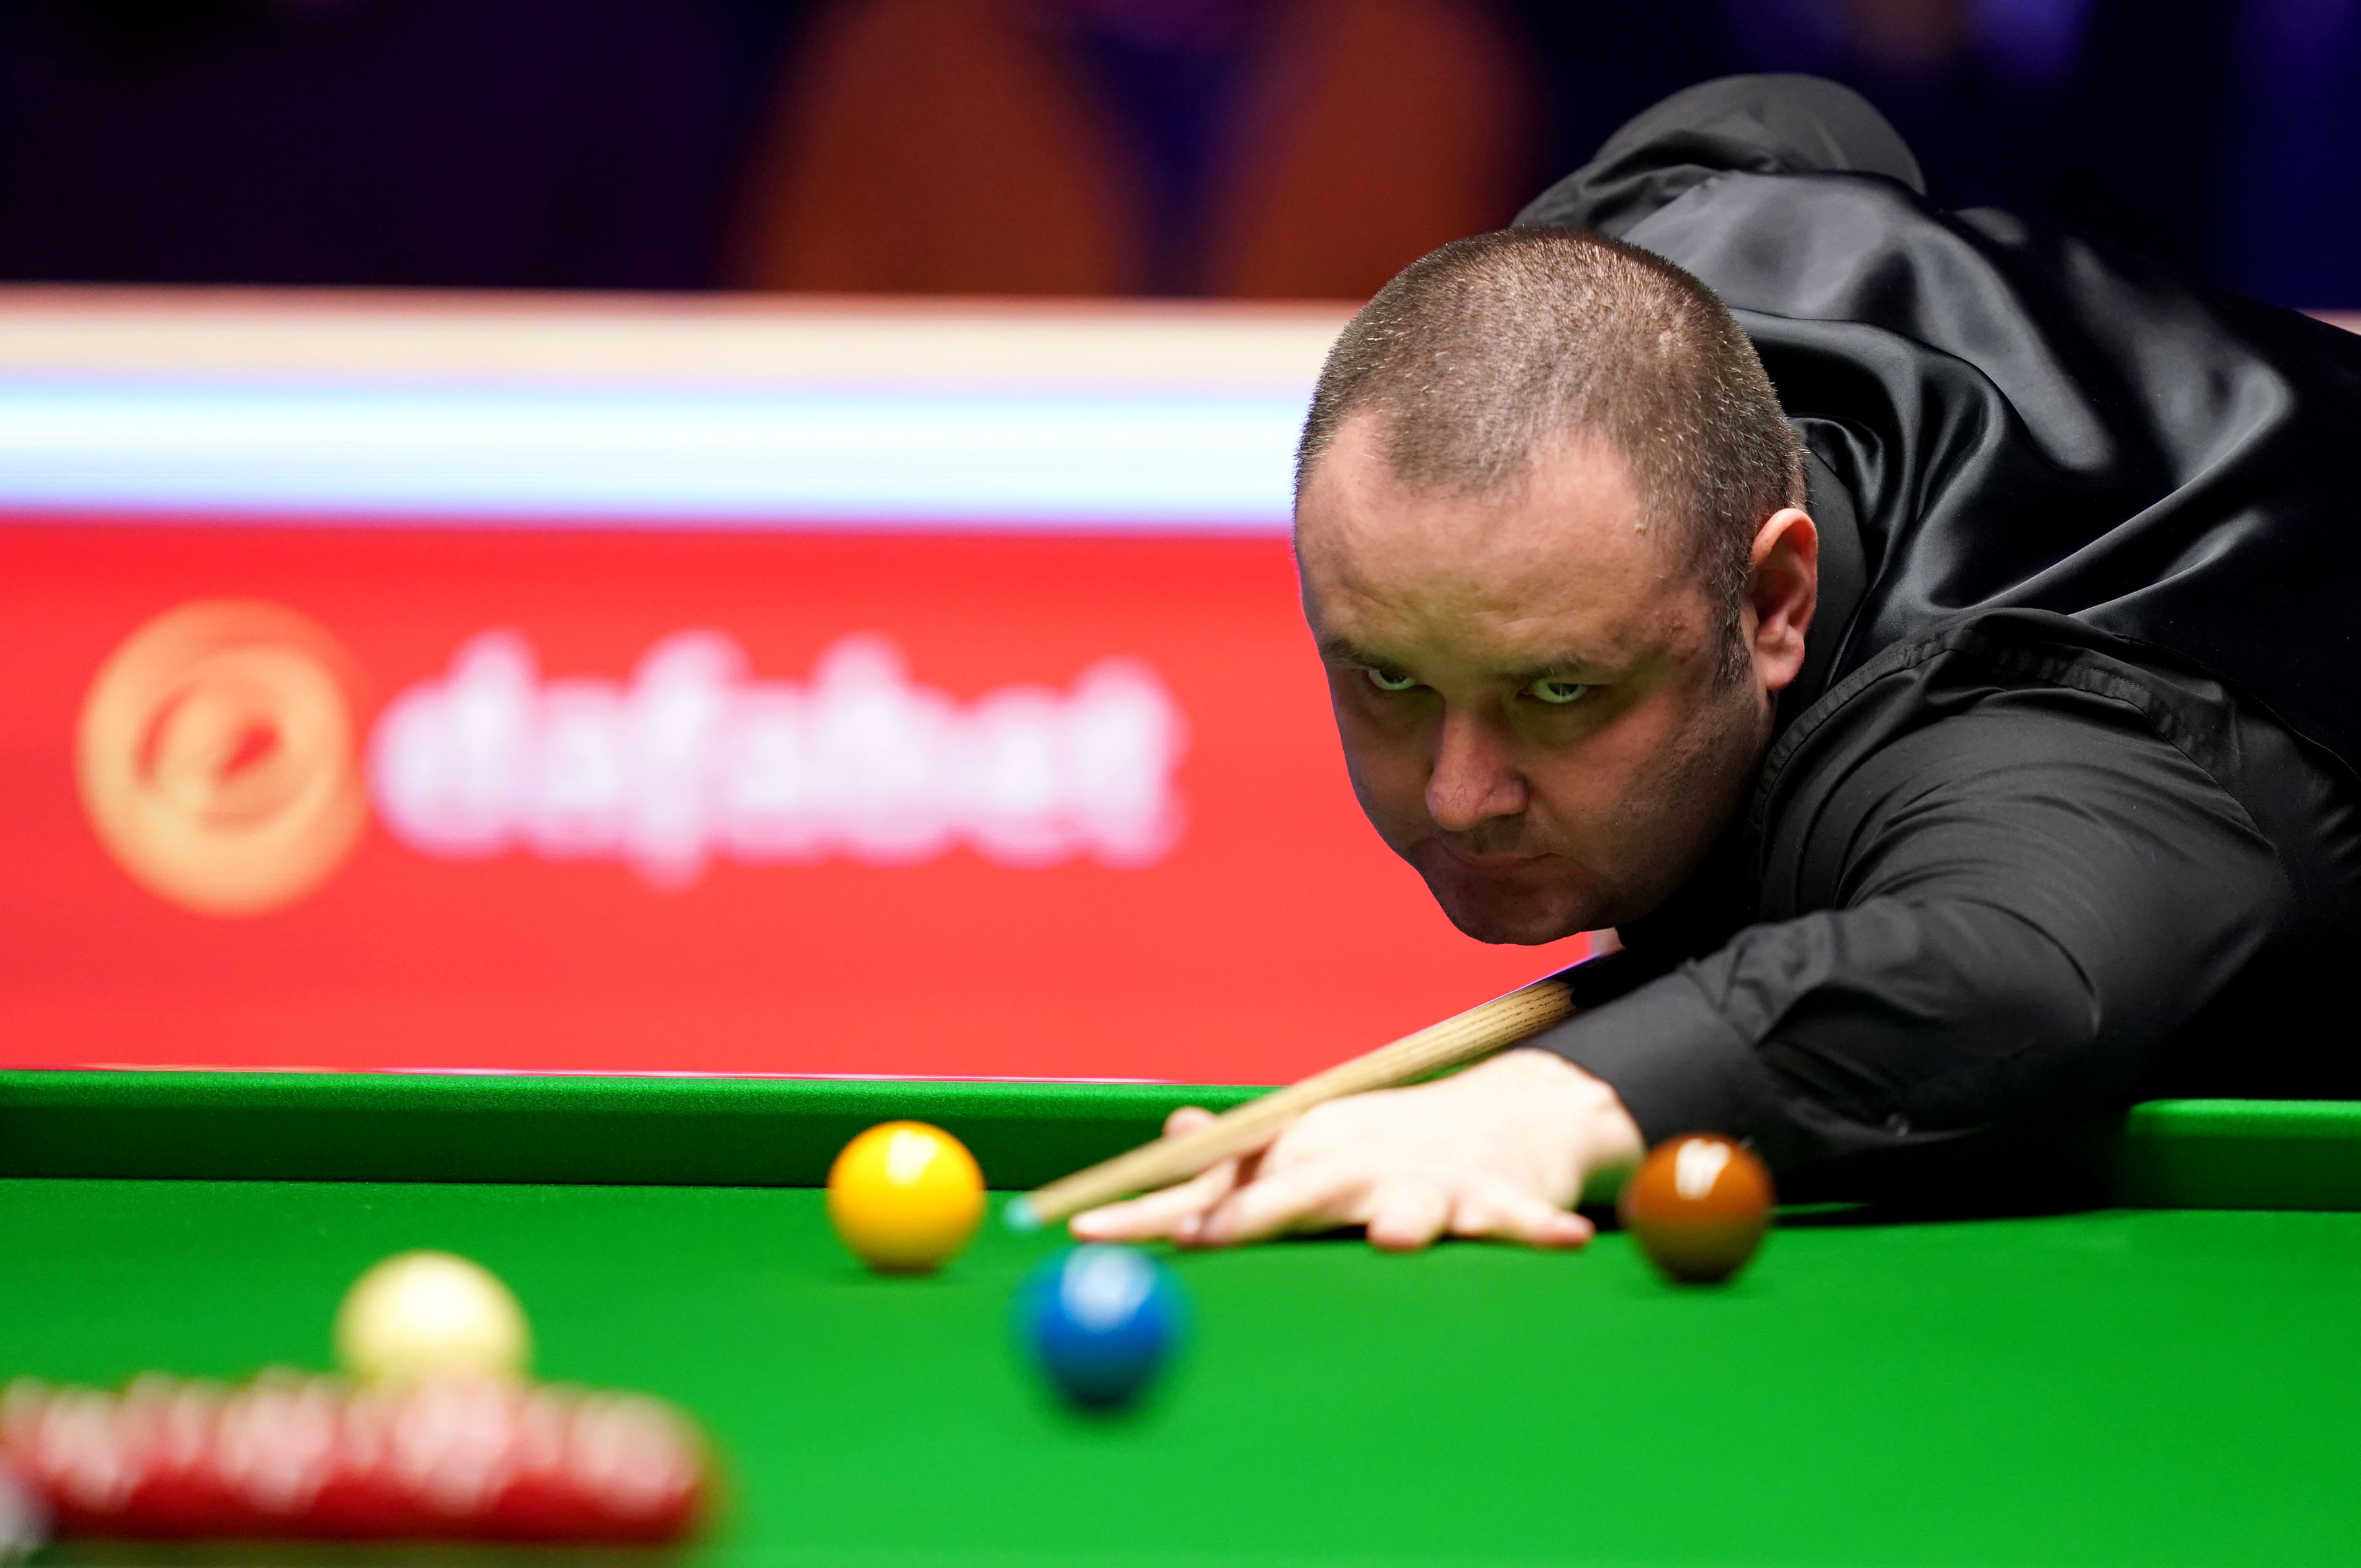 Tour Championship snooker results Judd Trump 6-9 Stephen Maguire